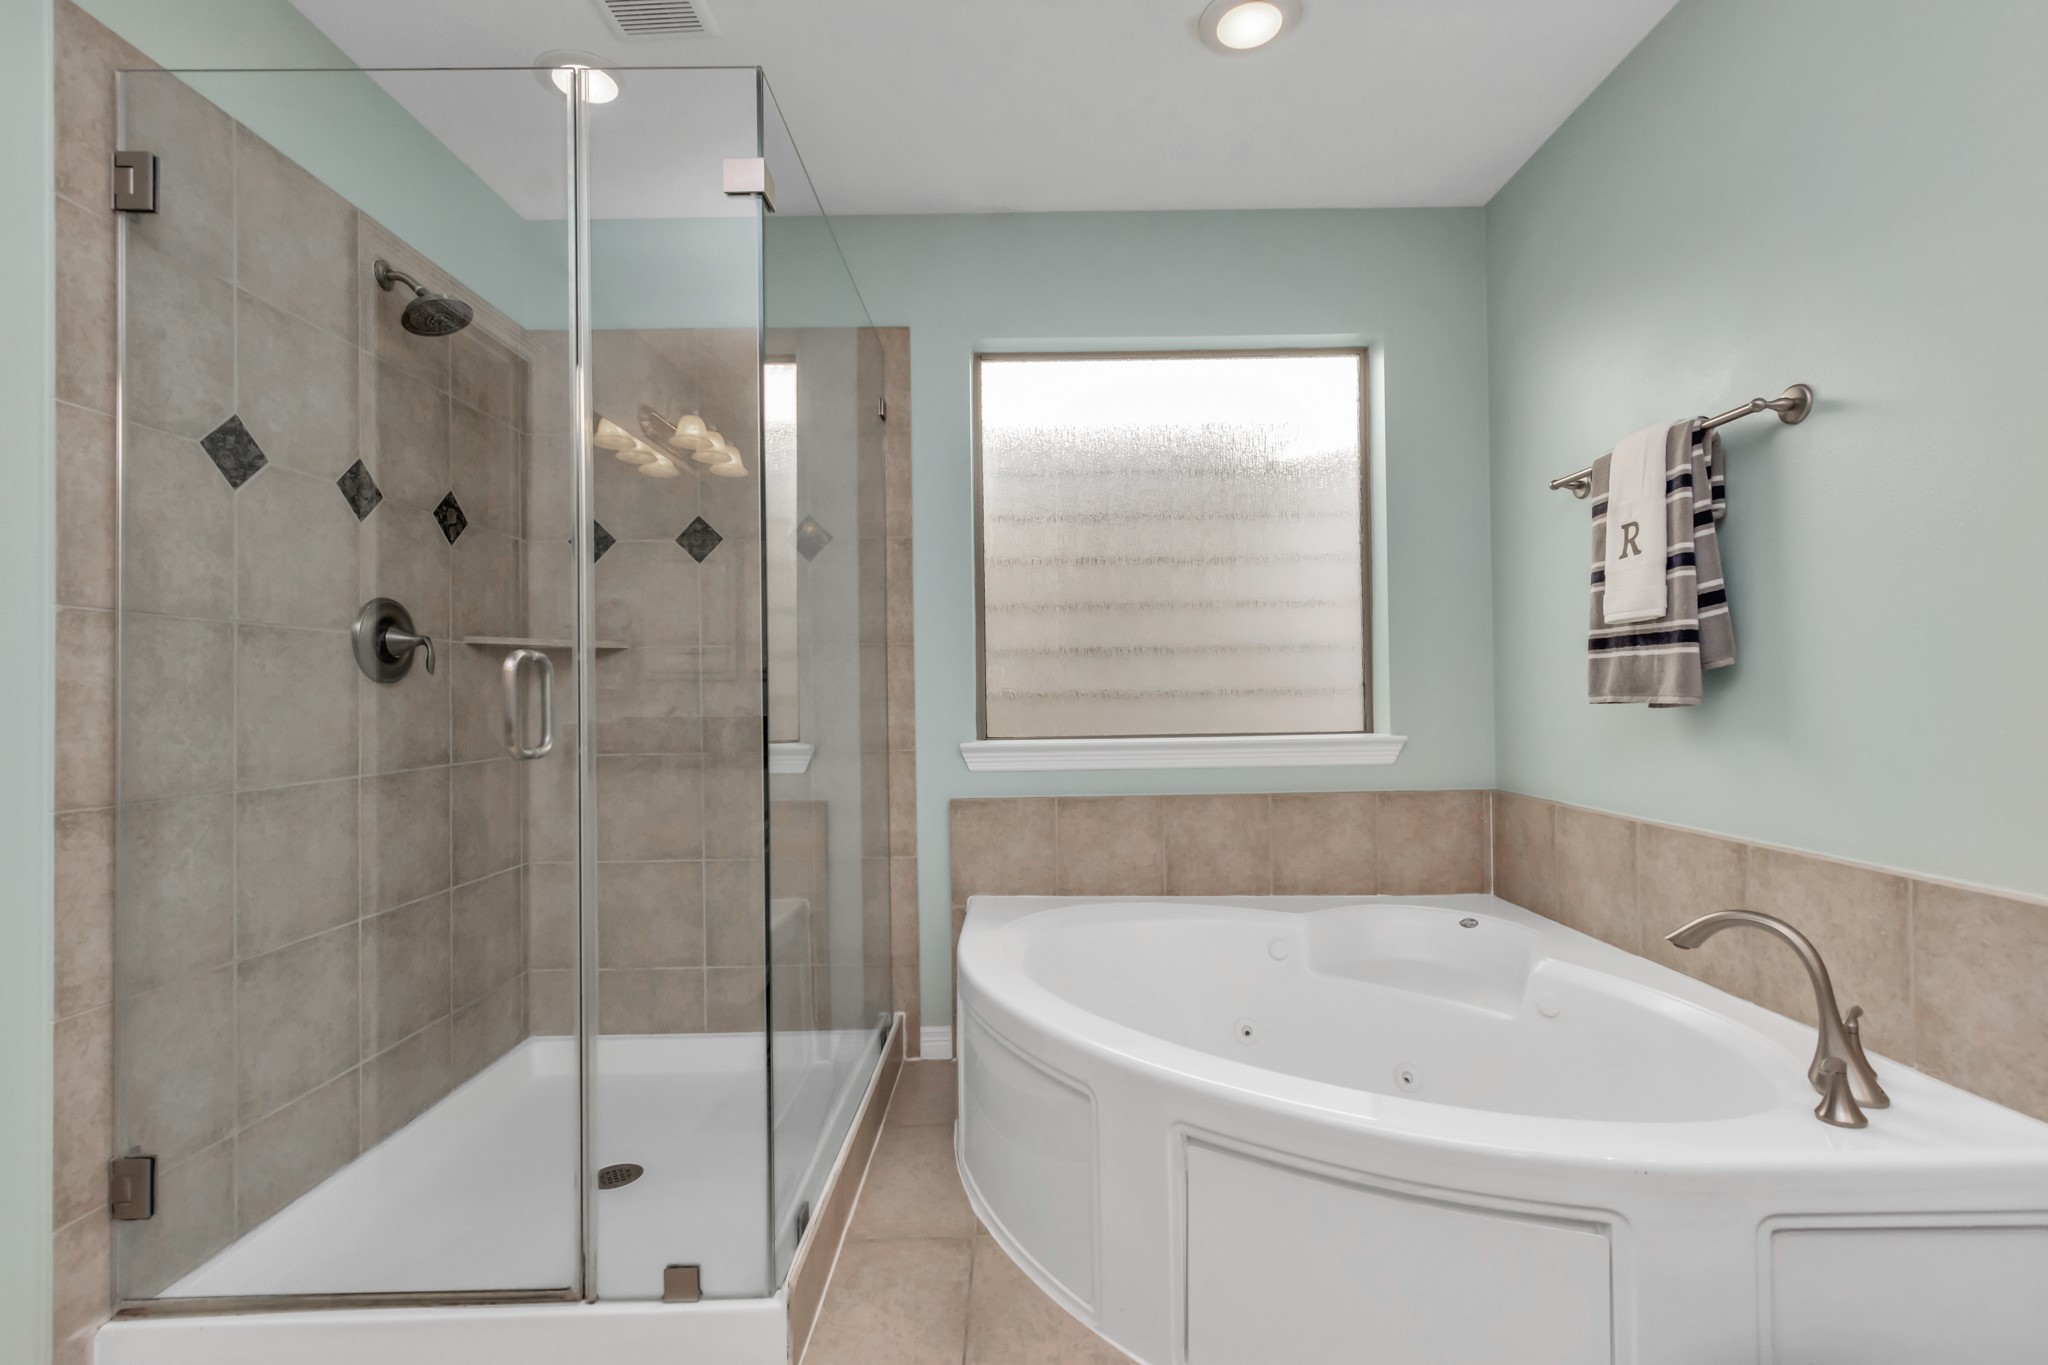 An immense seamless glass shower is not only useful but also brings a sense of beauty to this bathroom. Indulge in leisurely soaks with the generously sized corner tub, providing the perfect setting for relaxation.